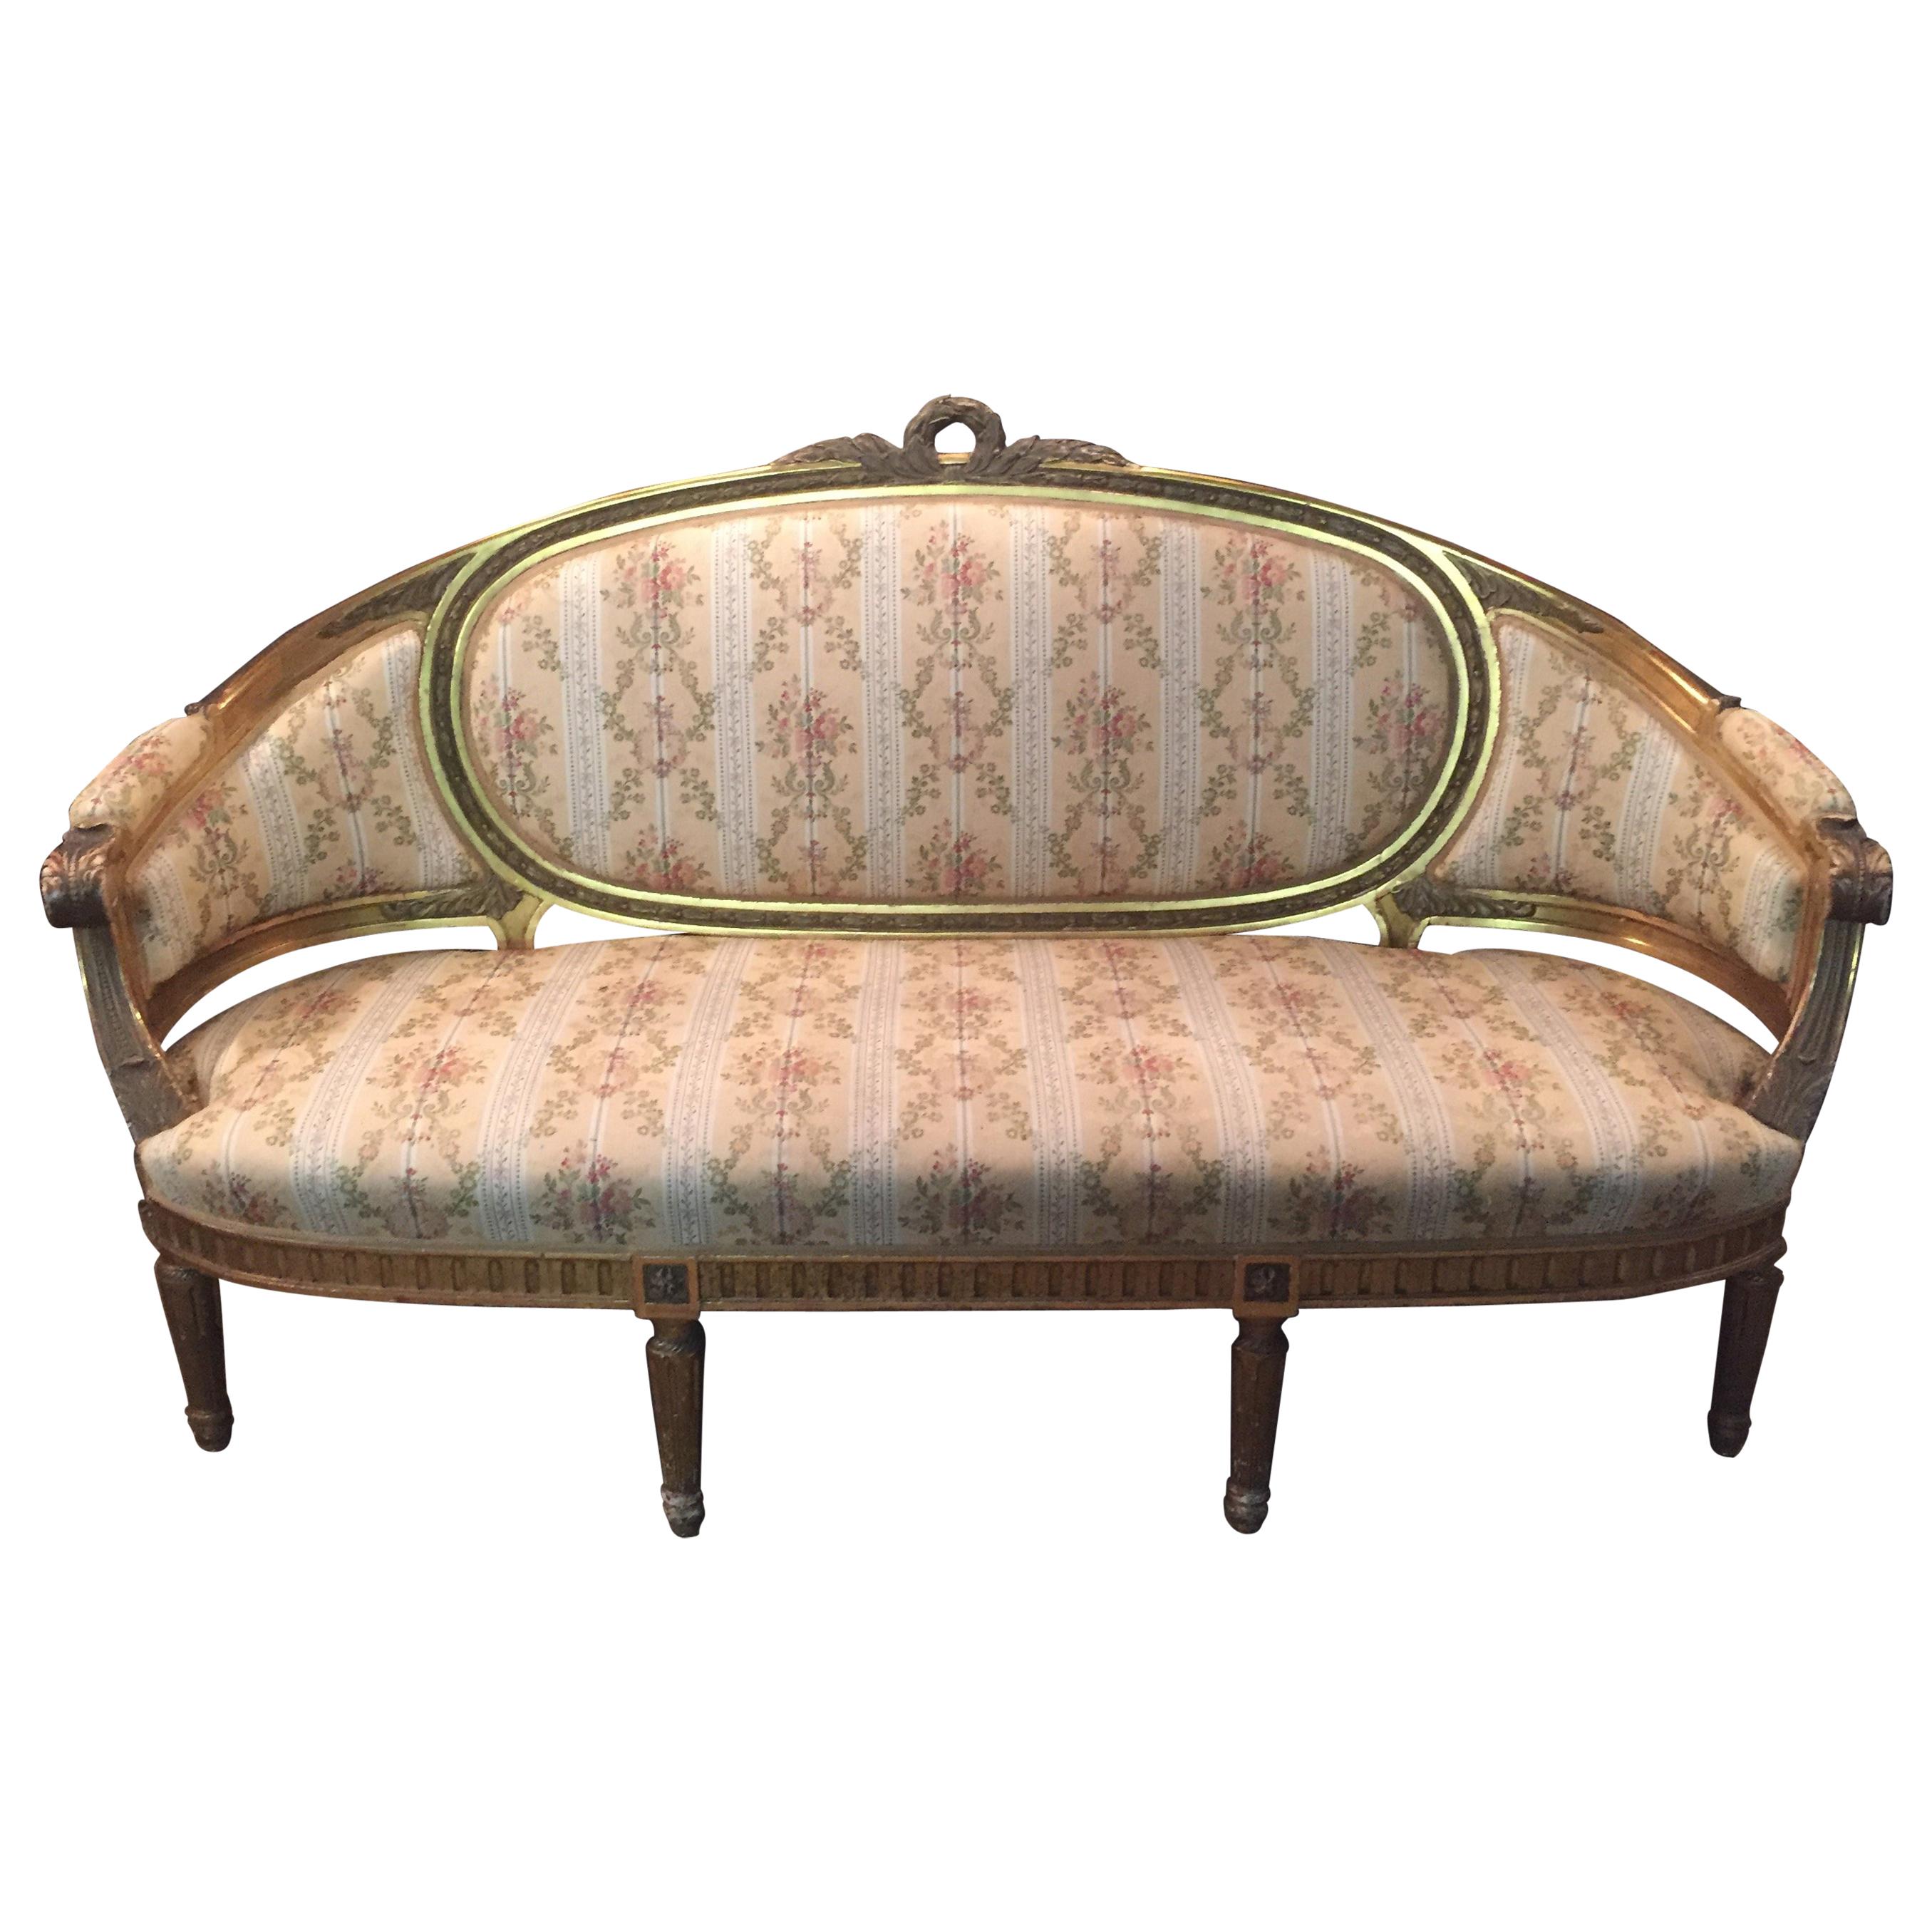 19th Century Sofa in Louis XVI Style, Solid Beech Wood Poliment Gilded